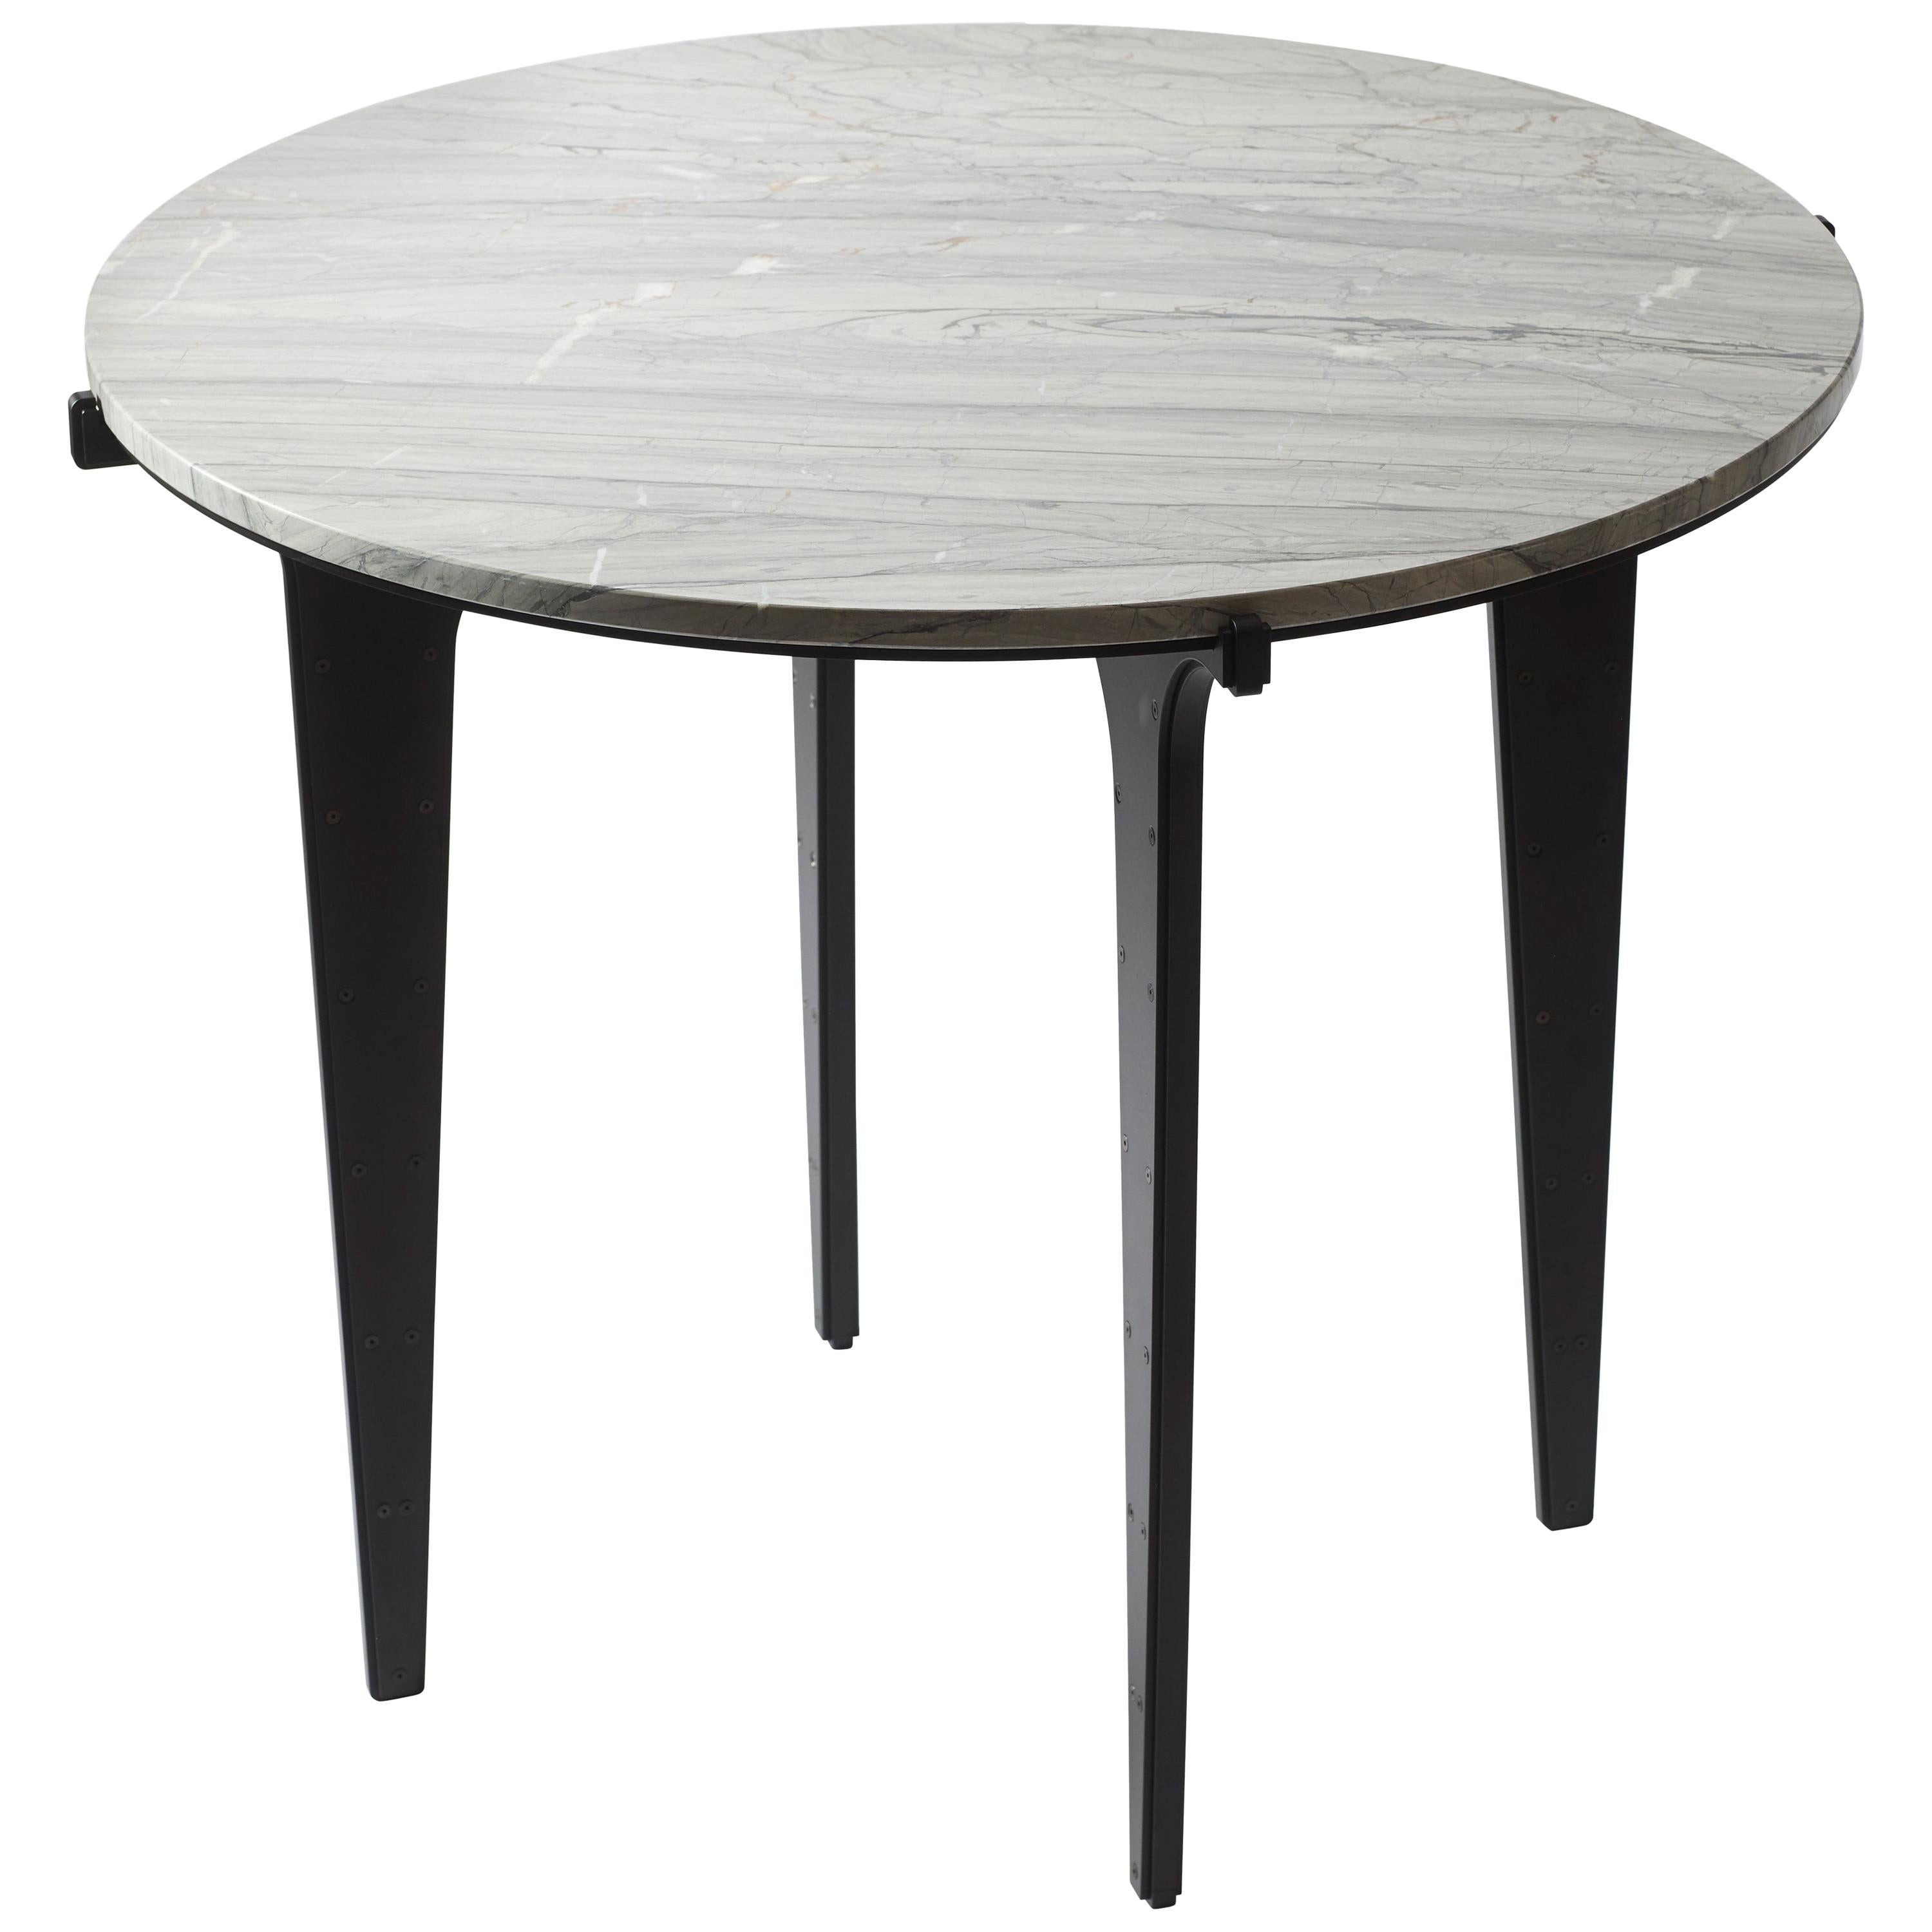 White (Carrara - White Stone) Prong Dining Table in Blackened Steel Base with Marble Top by Gabriel Scott